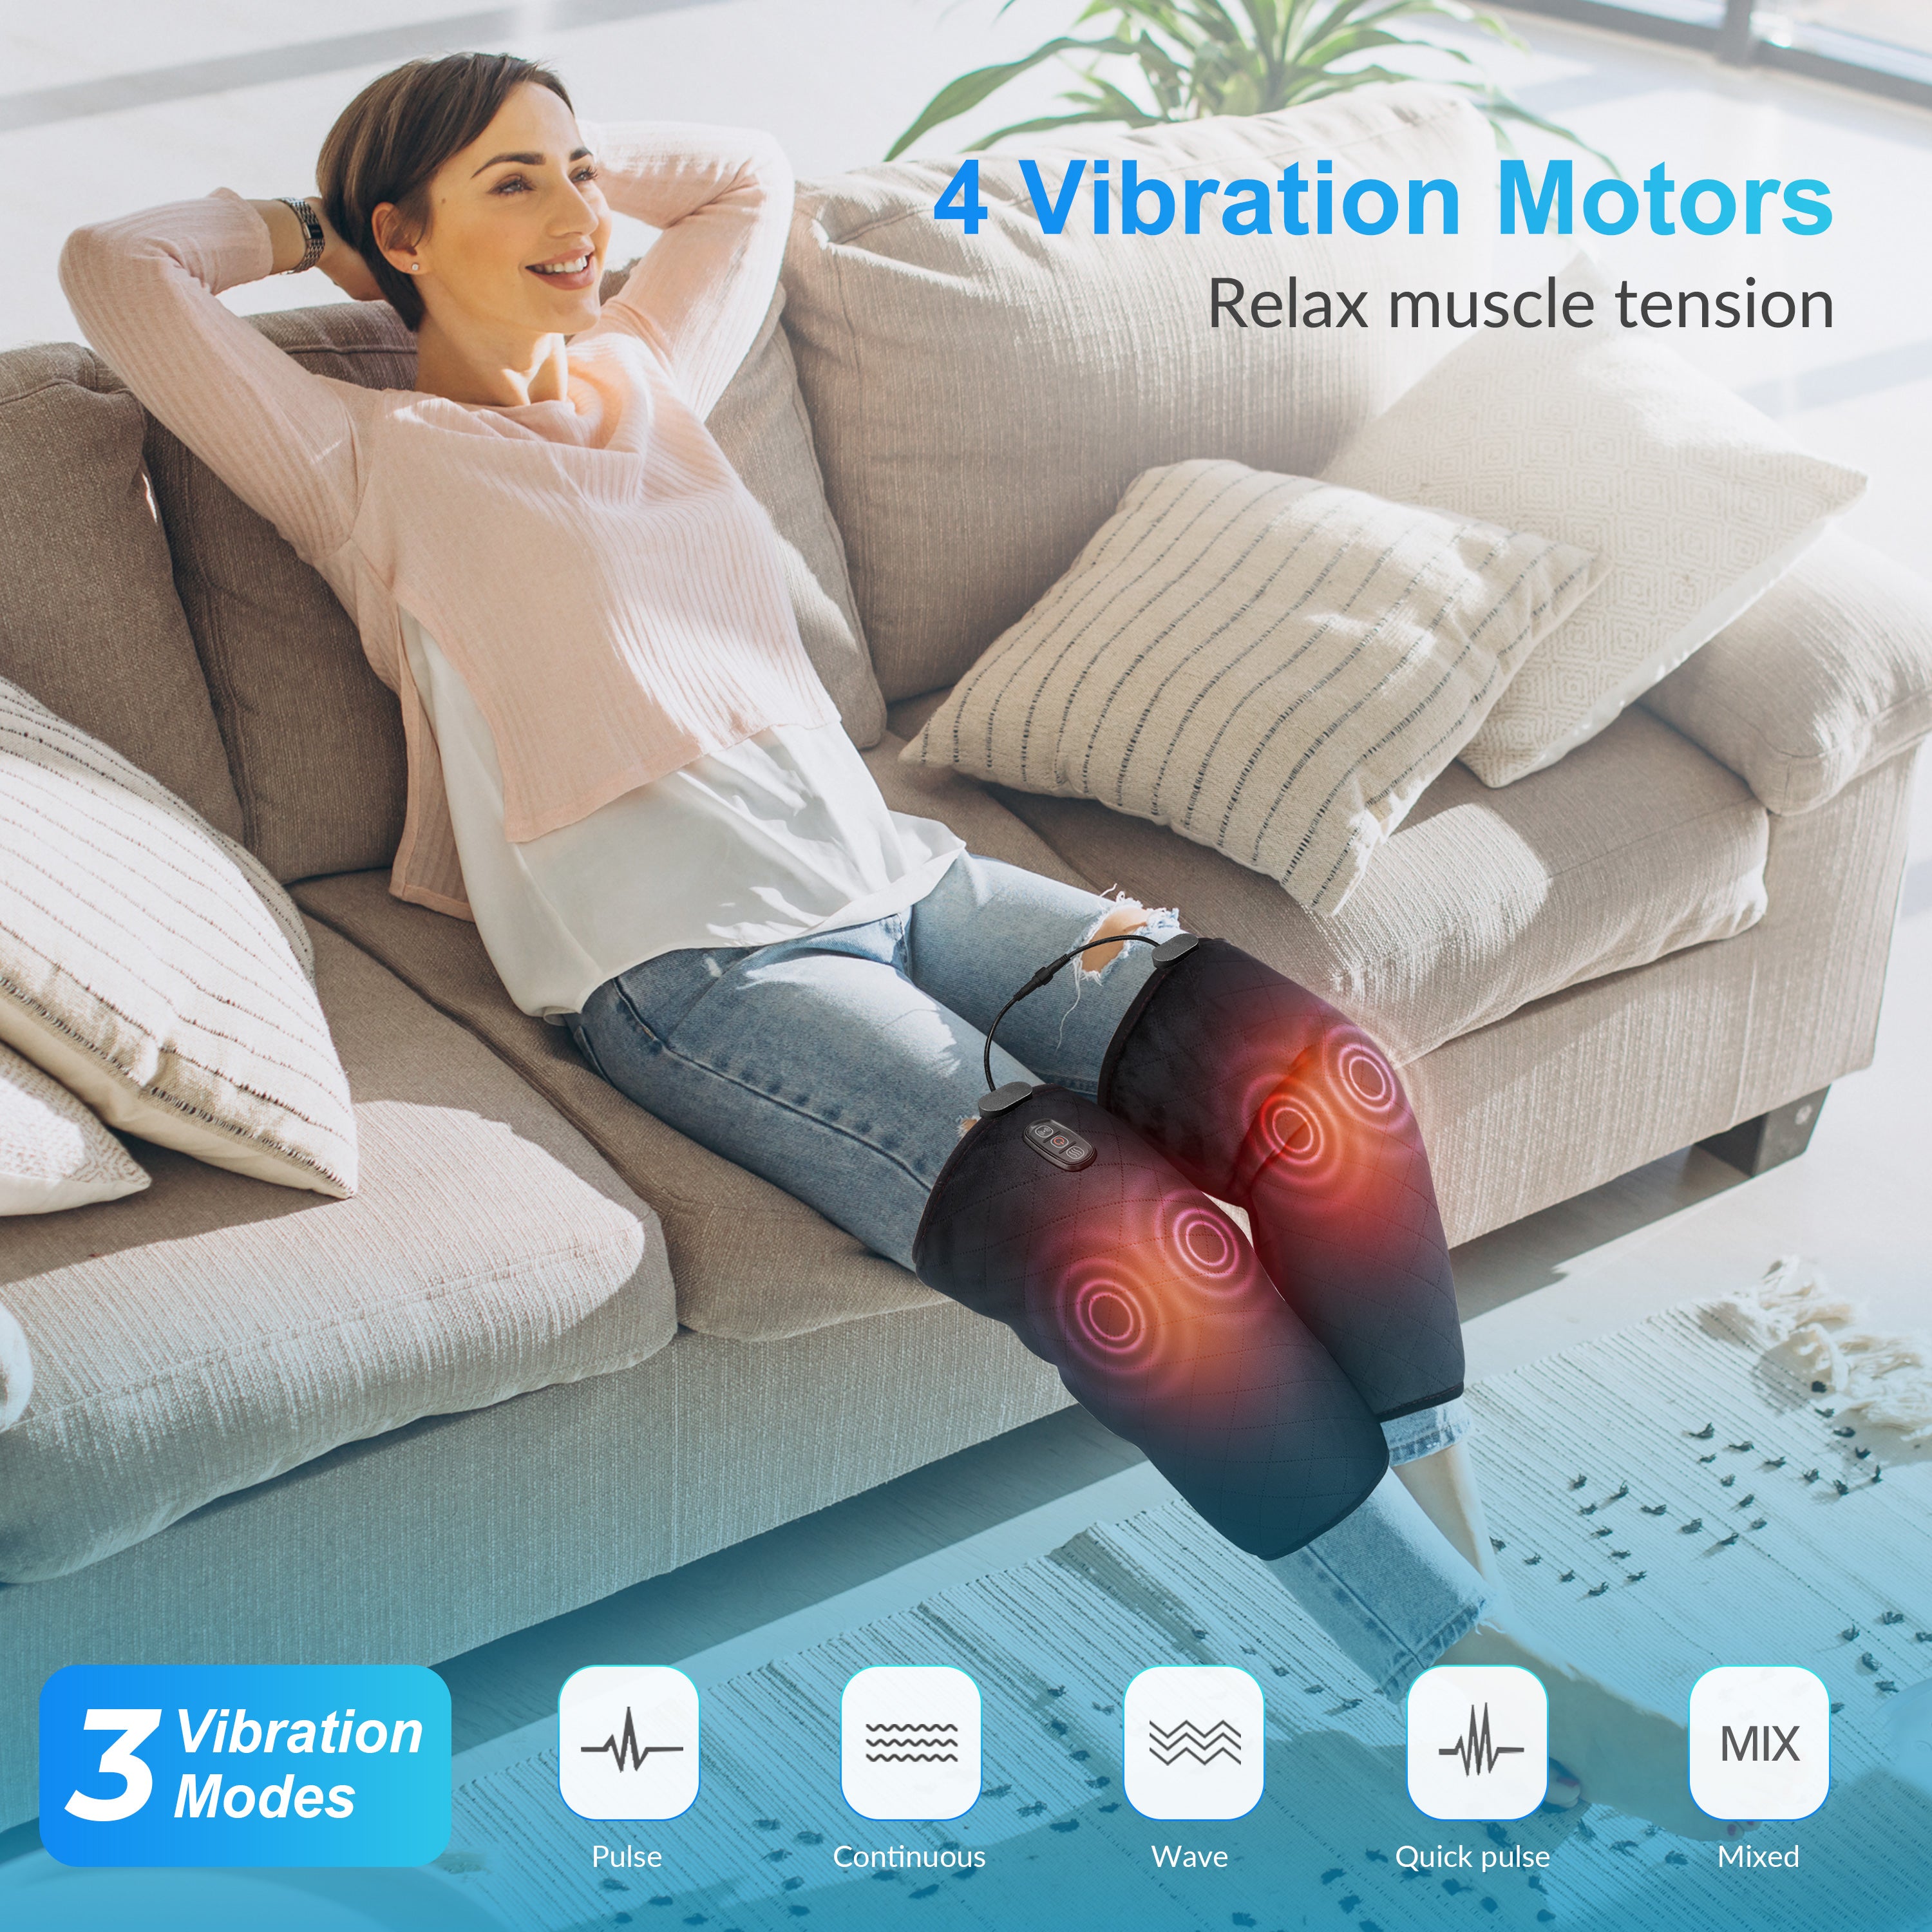 Healthier You: Why you Need a Vibration Massage, by Kilimall, Kilimall